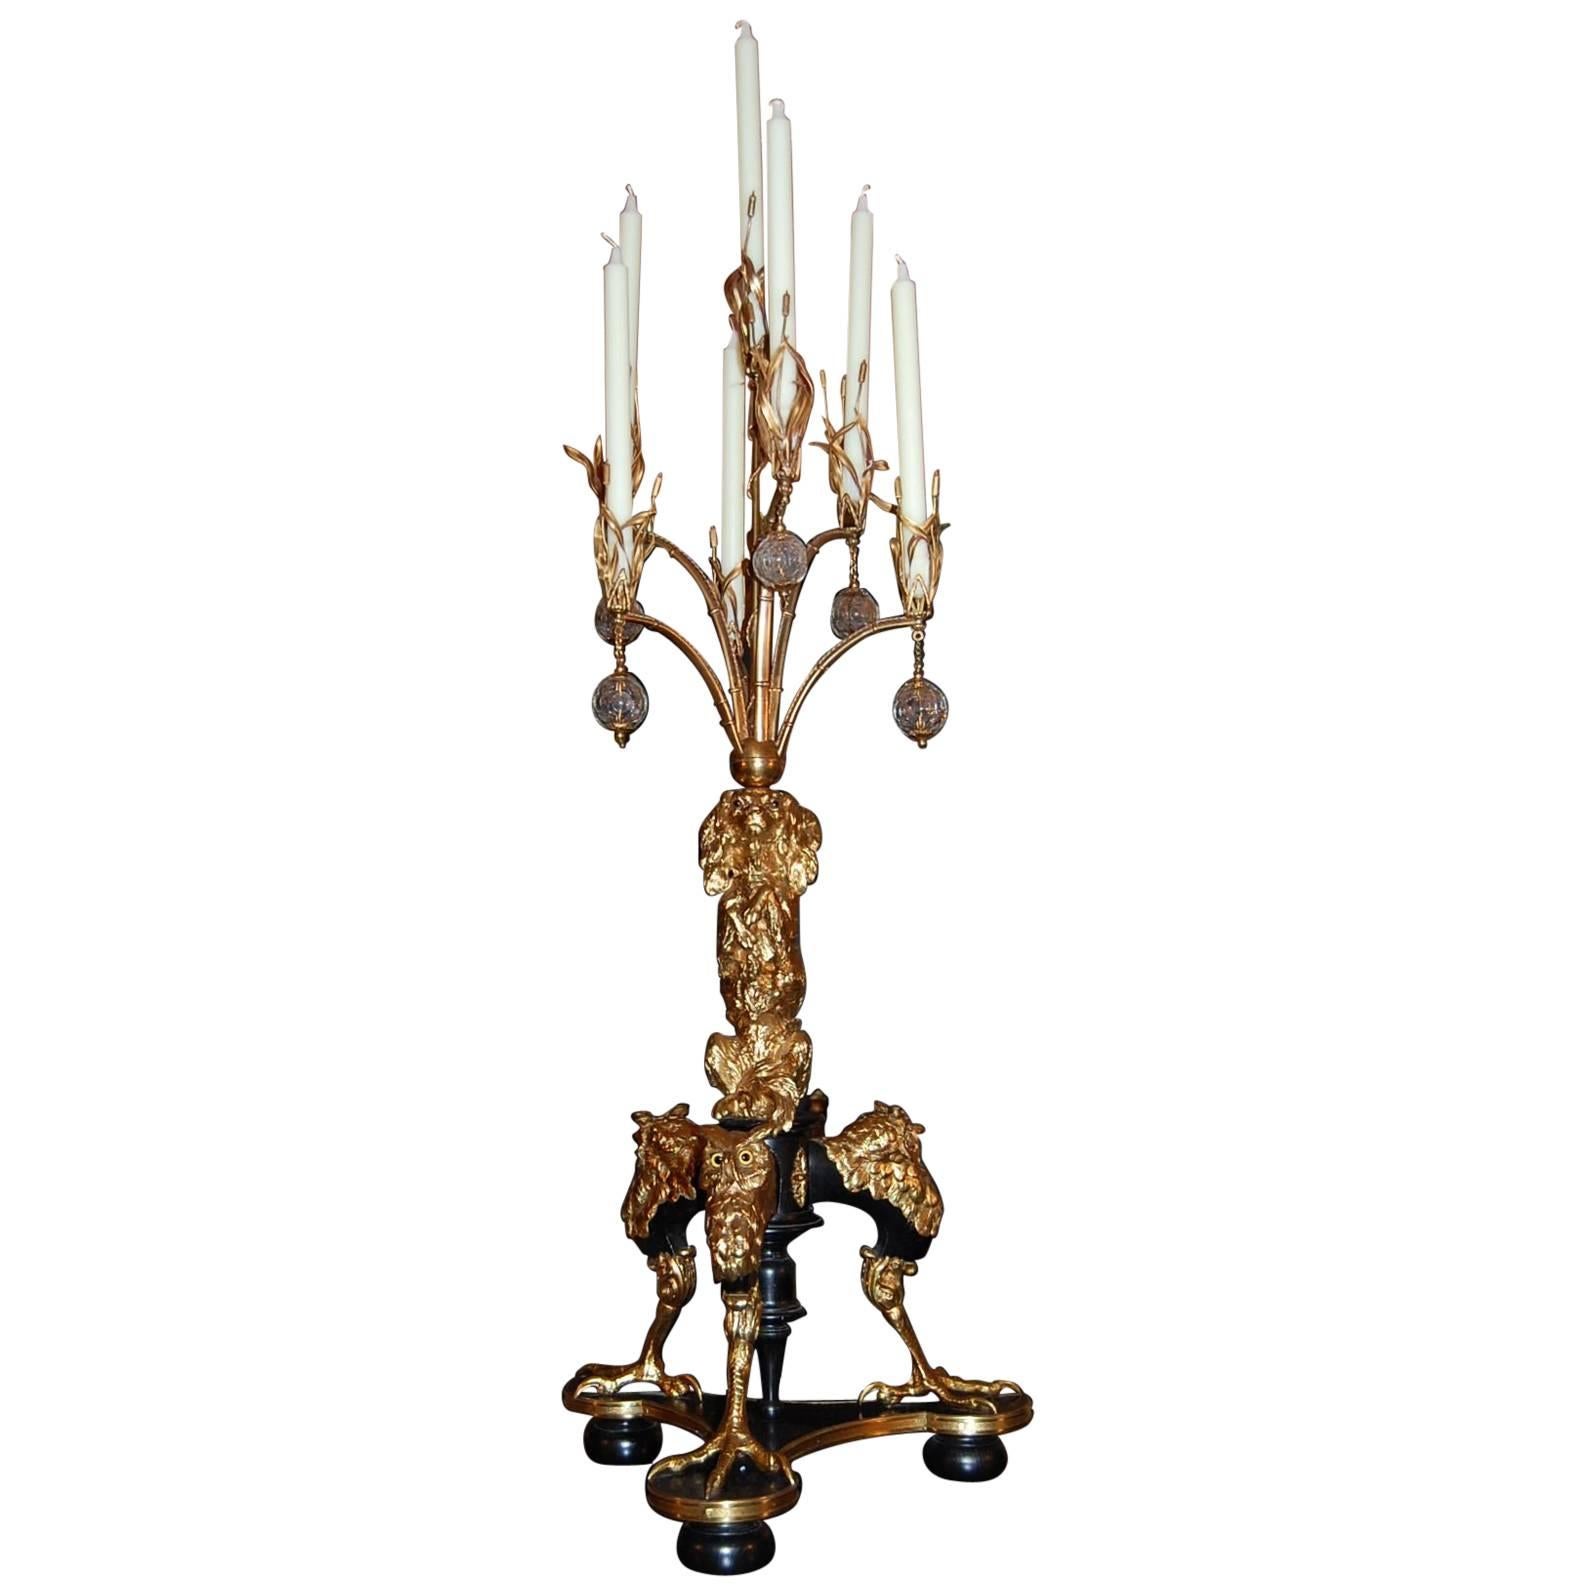 Early 19th Century Large Gilt Brass and Wood Candelabra with Glass Balls For Sale